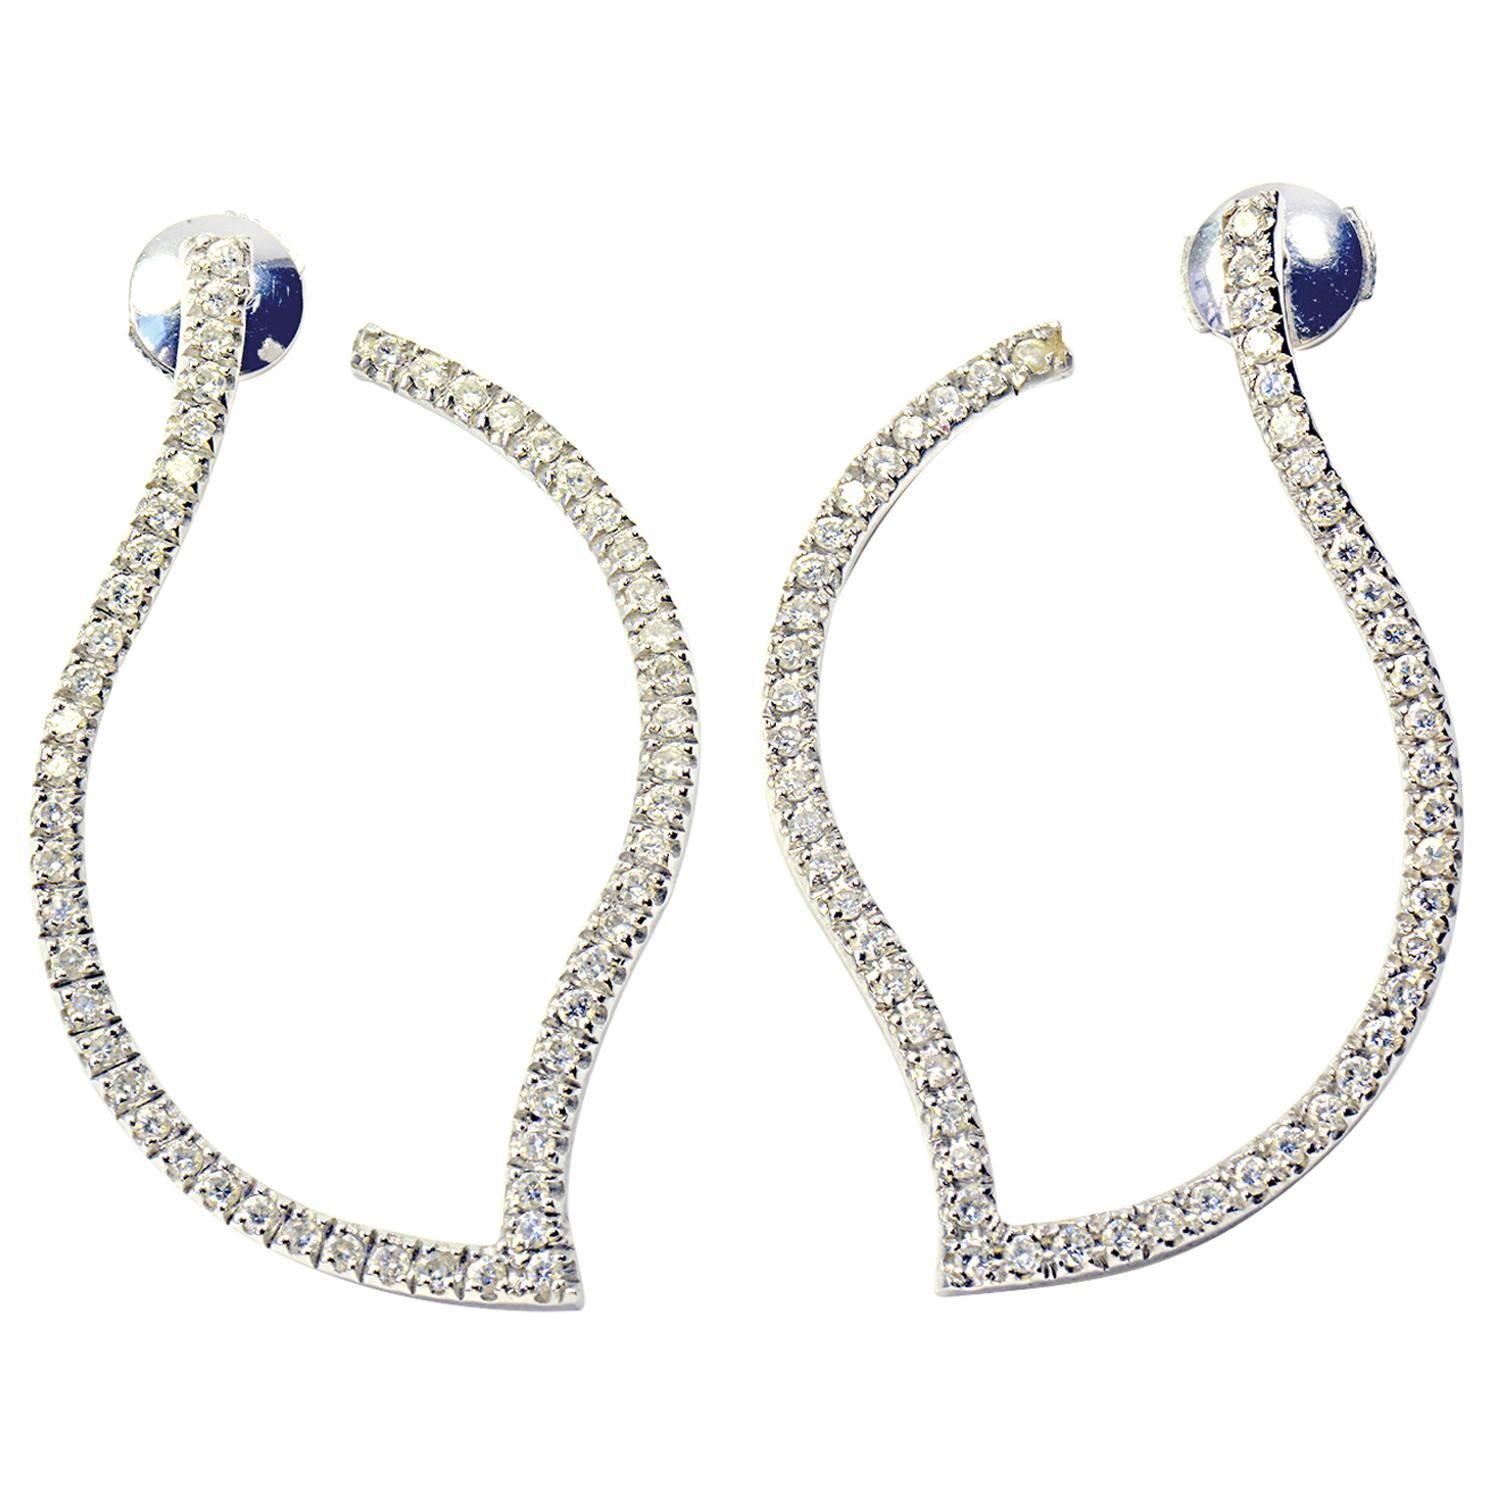 2,69 carats Diamonds and 18K White Gold Hoop Earrings by Marion Jeantet